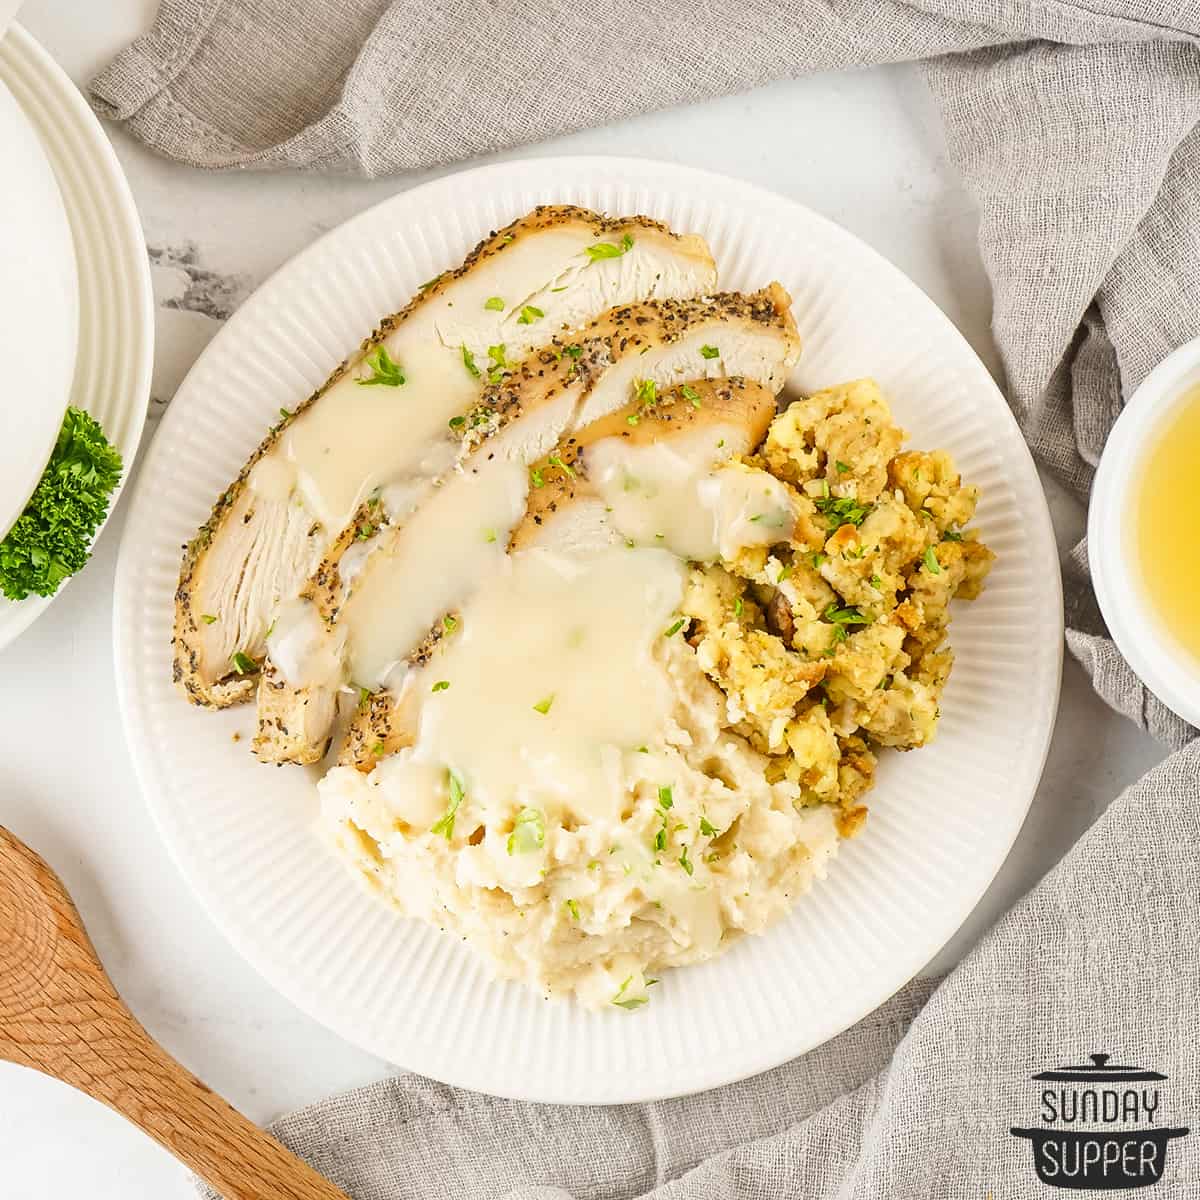 a plate with turkey breast, stuffing, and mashed potatoes covered in turkey gravy